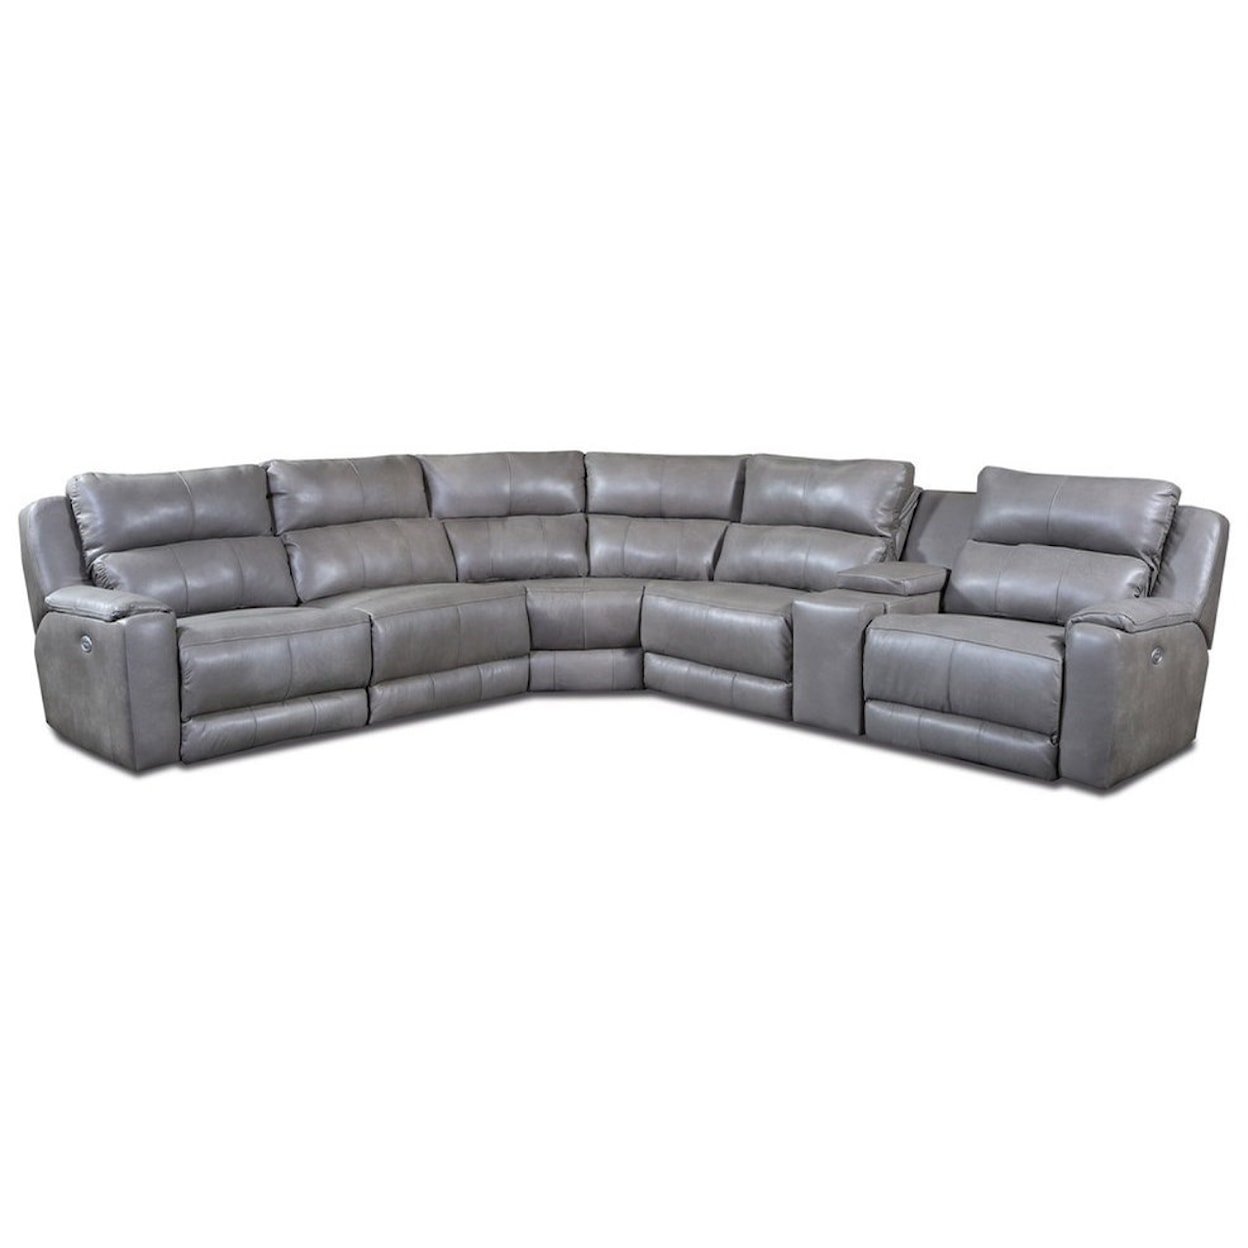 Powell's Motion Dazzle Sectional w/ Cup Holders and Power Headrests